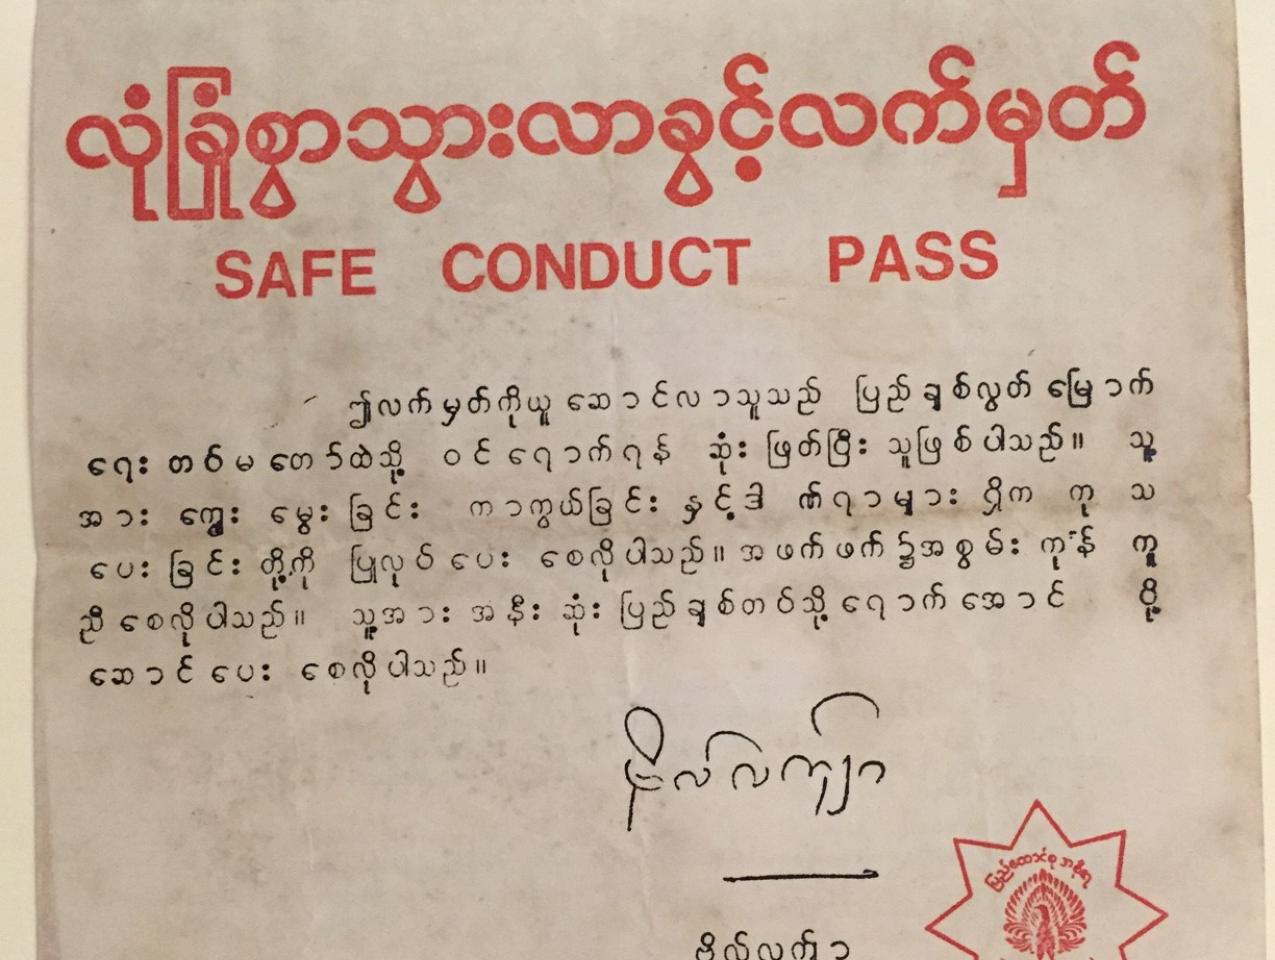 A safe conduct pass issued in the early 1970s by the Parliamentary Democratic Party, a group led by U Nu, who had also led an armed resistance group on the Thai-Burmese border against the military rule of General Ne Win. (Burmese Subject Collection, Hoove